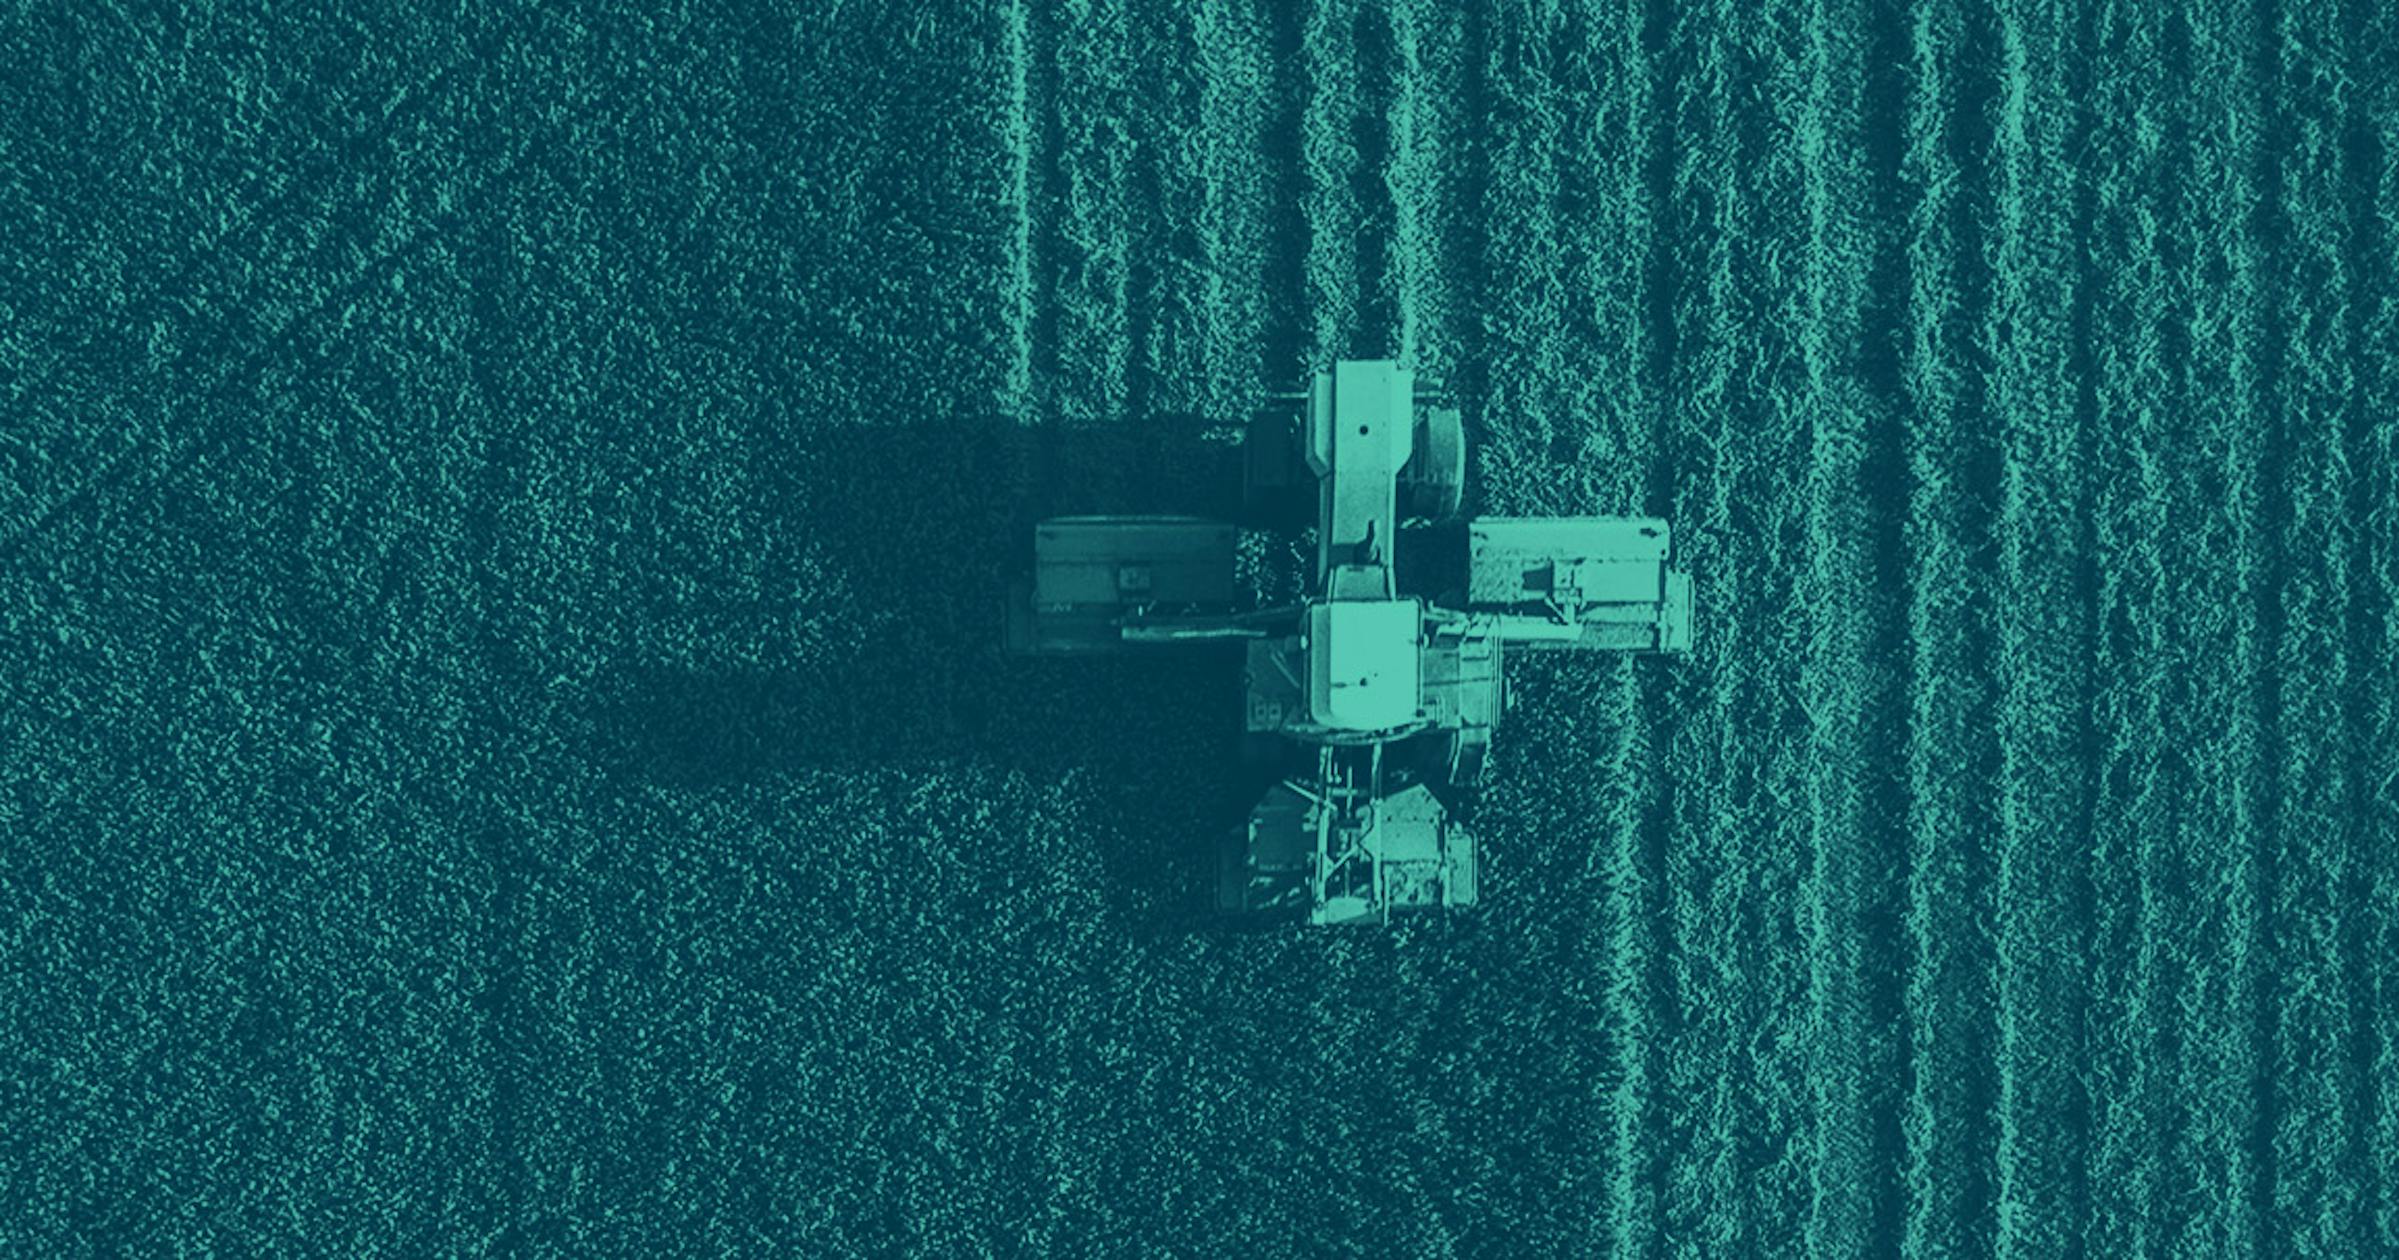 An aerial photo looking down on a tractor in a field, cutting a crop in a neat line.